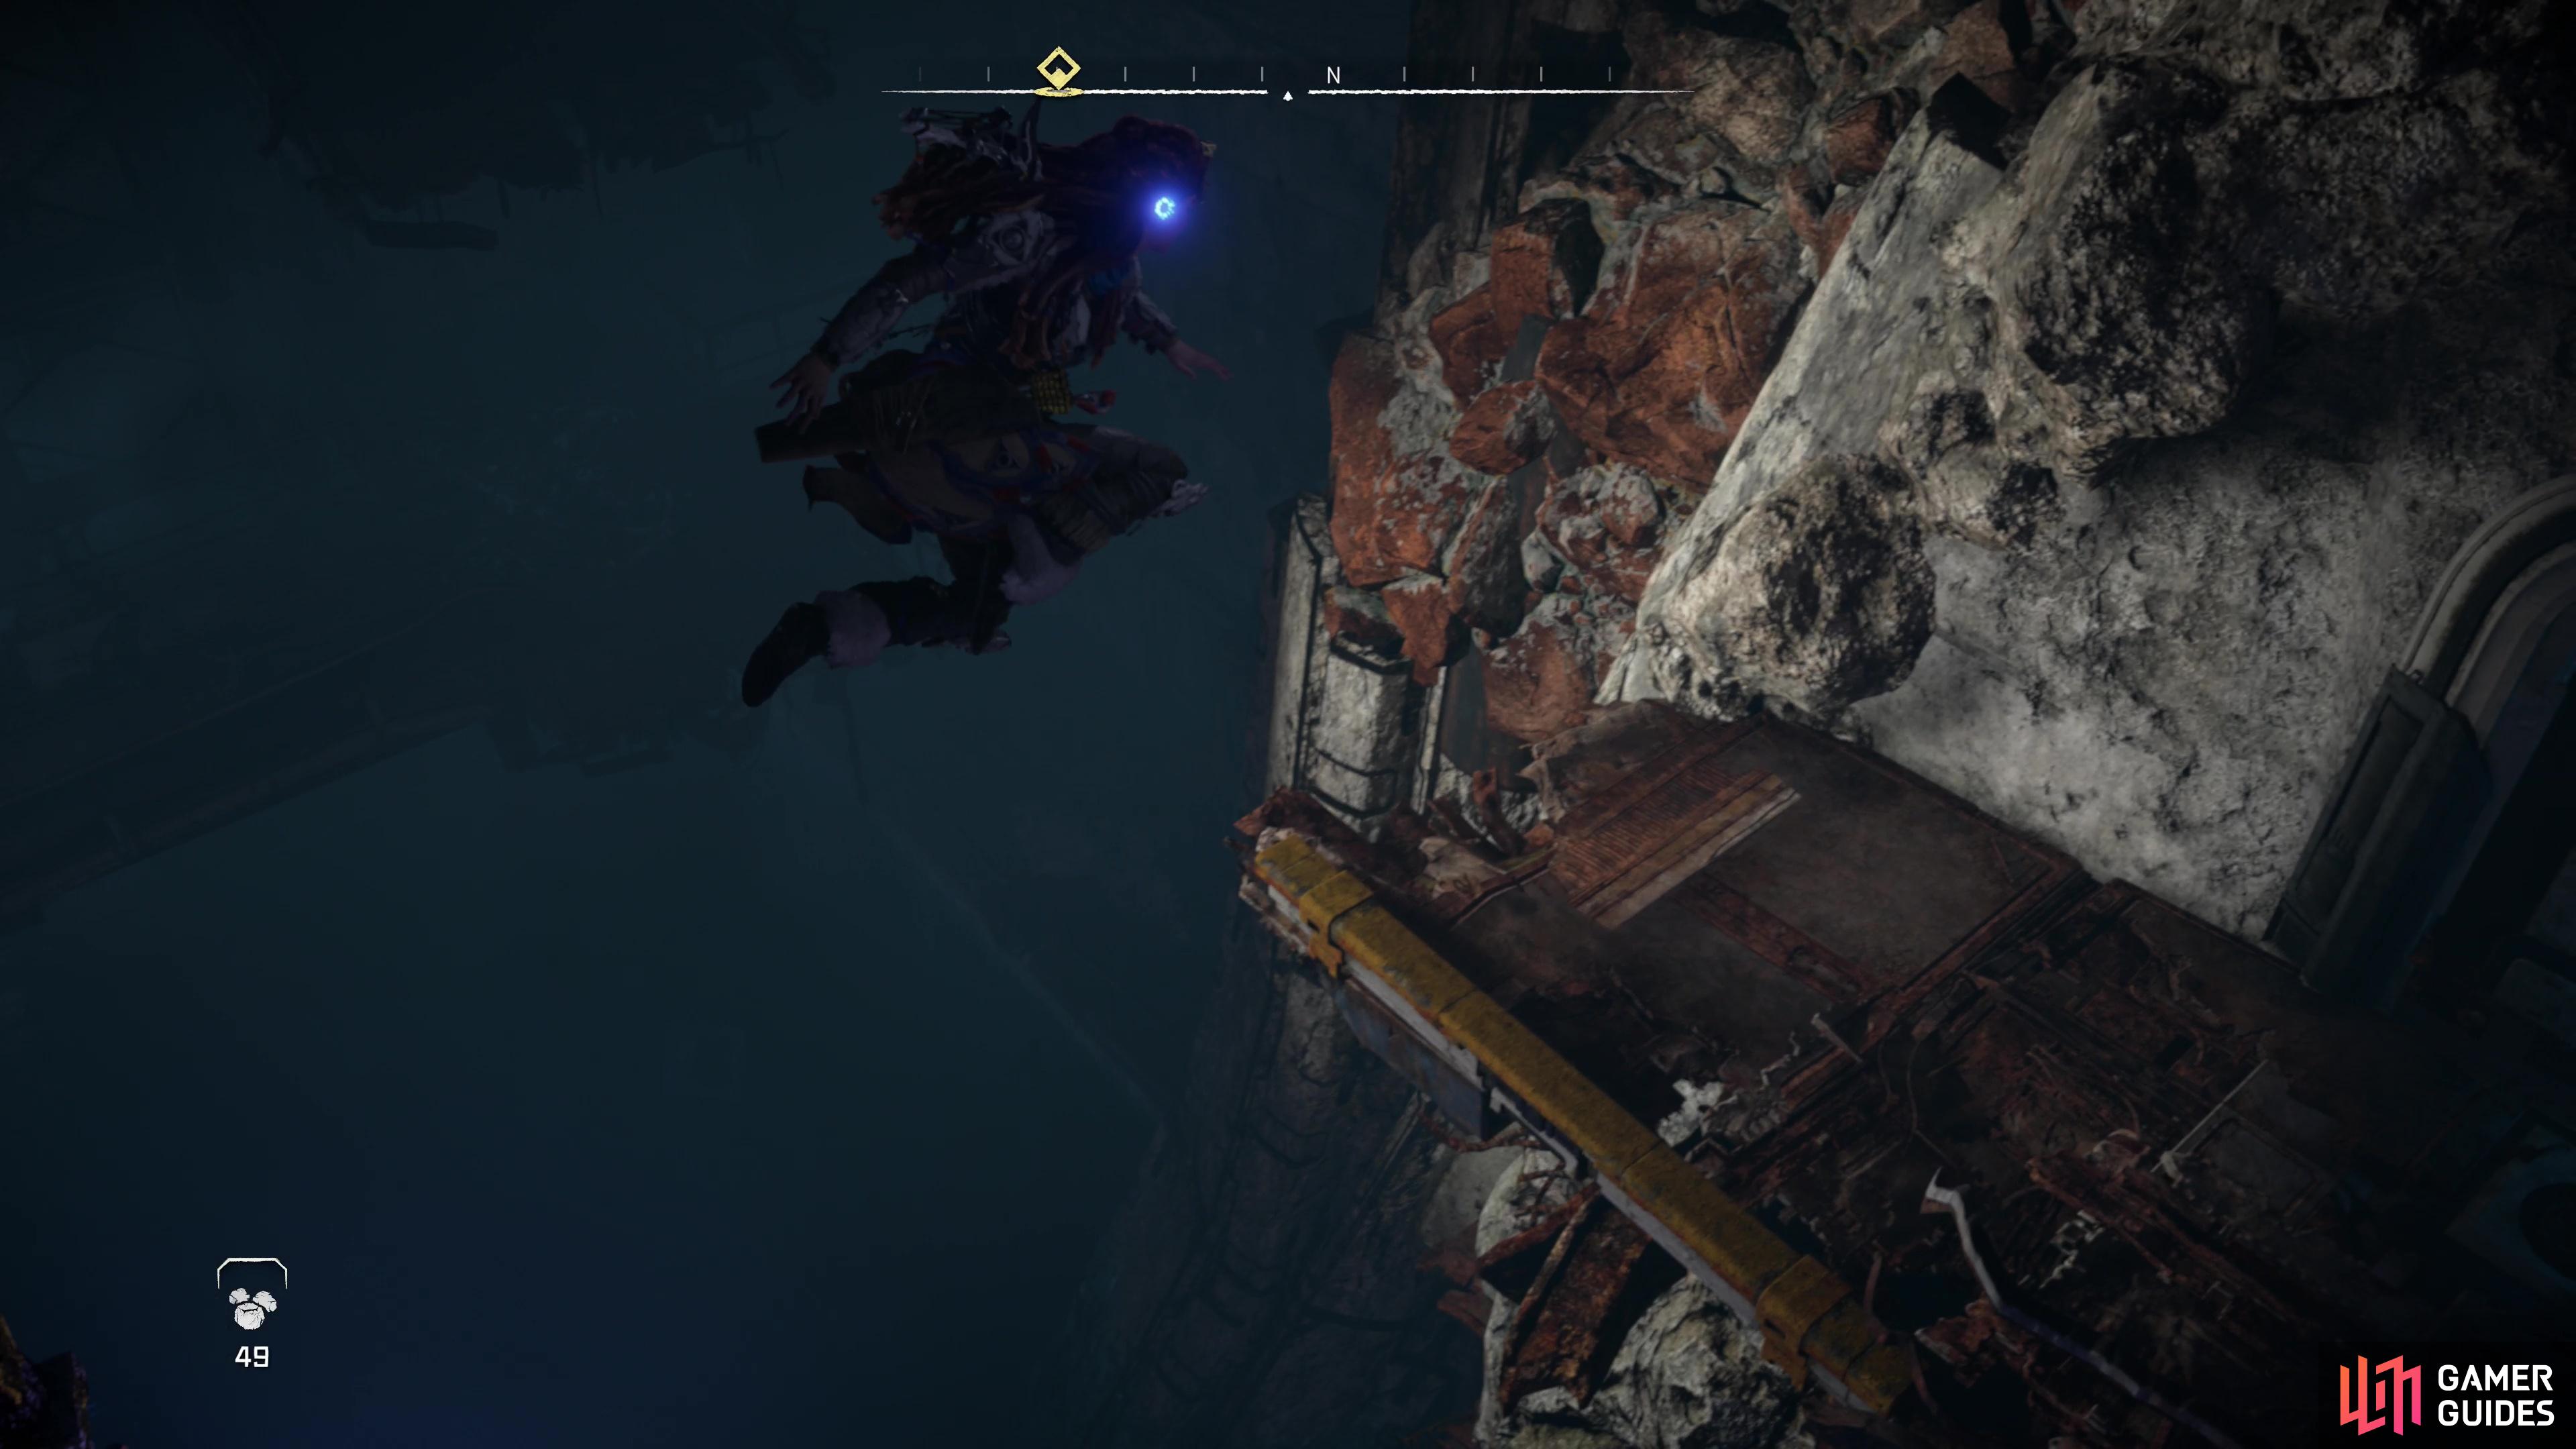 then leap backwards onto a platform to get some loot.